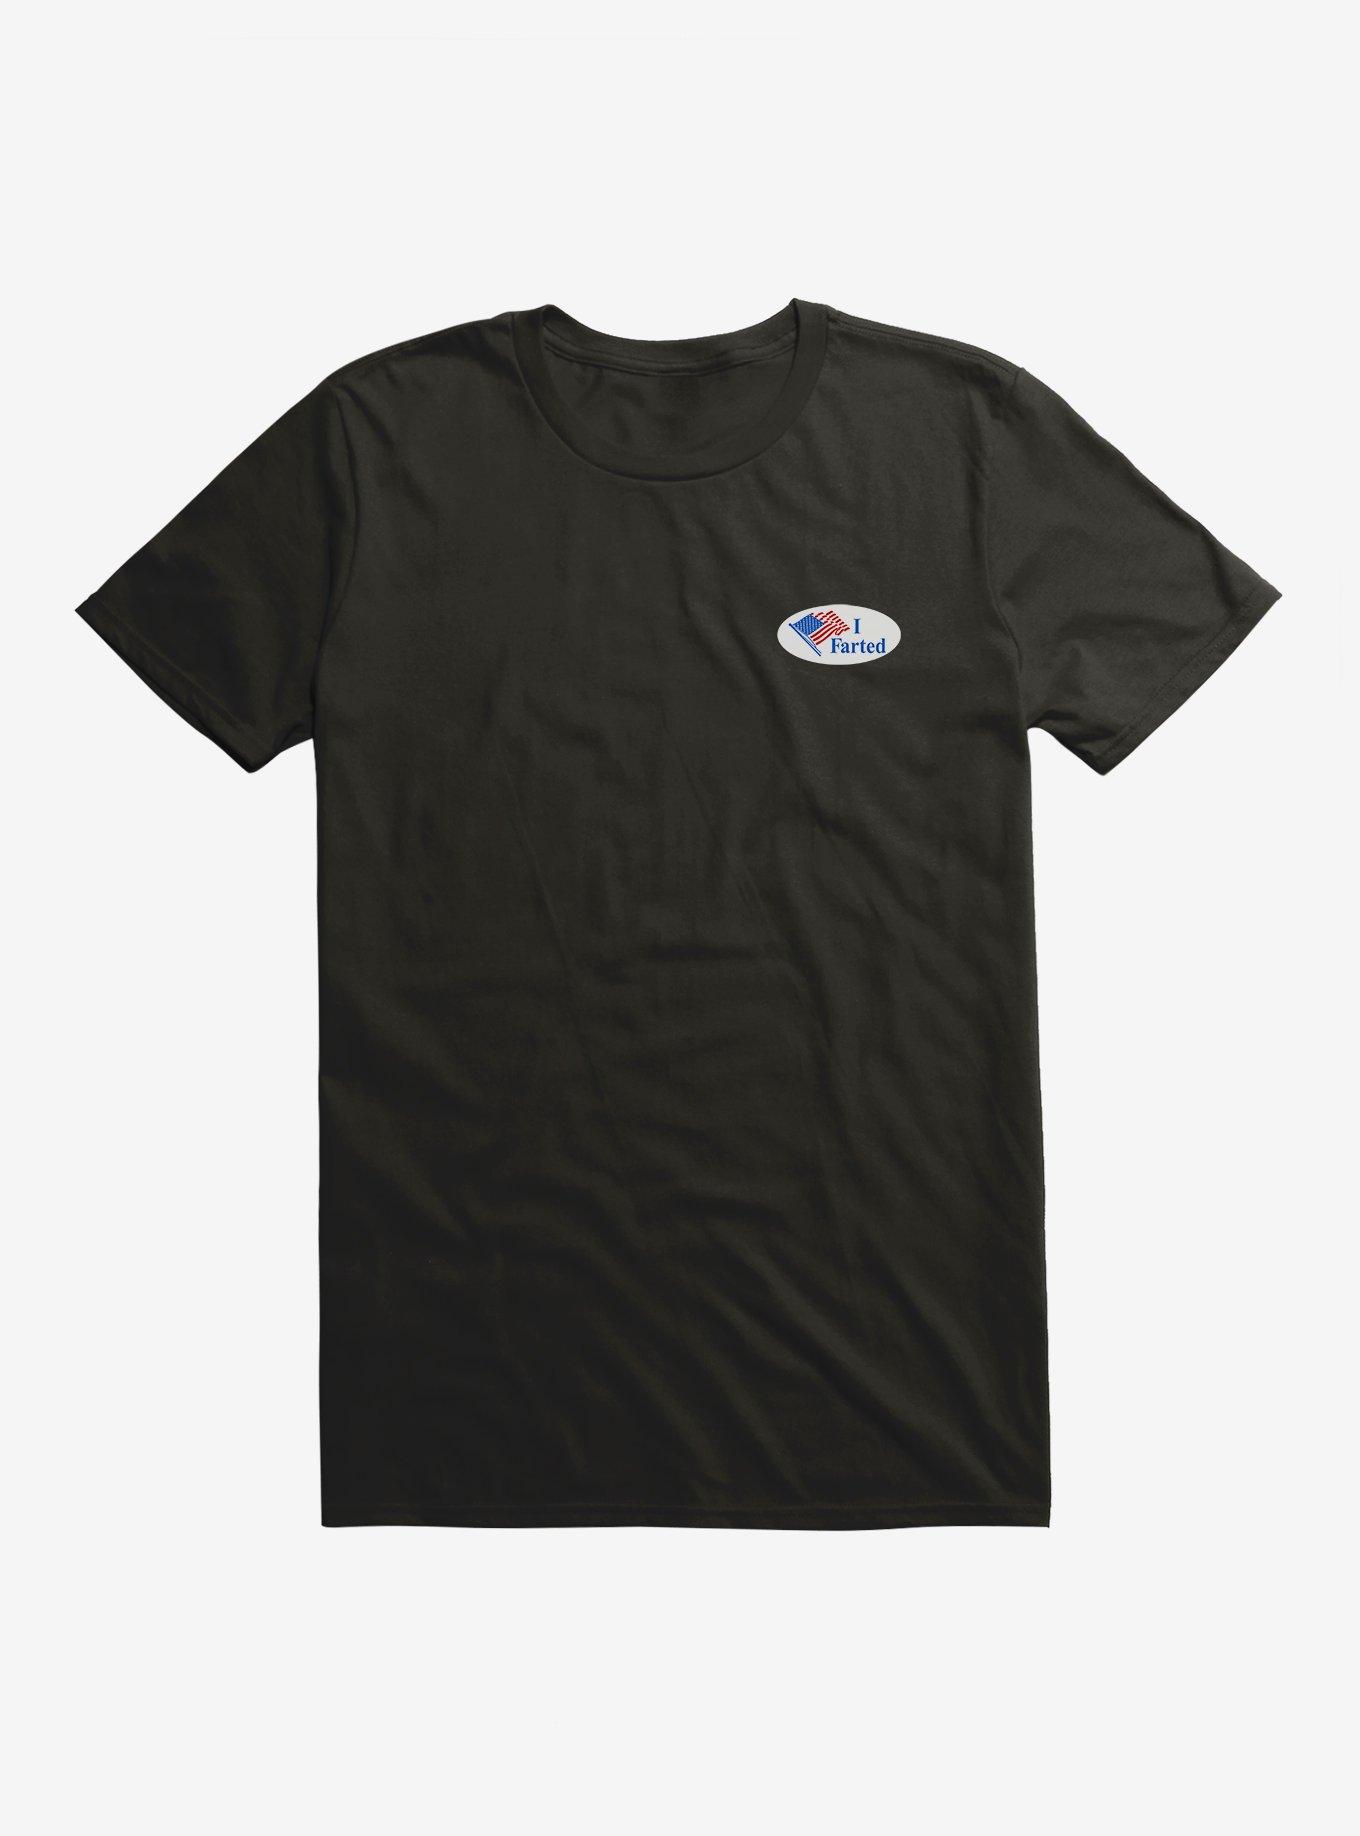 Voting Humor I Farted T-Shirt | BoxLunch